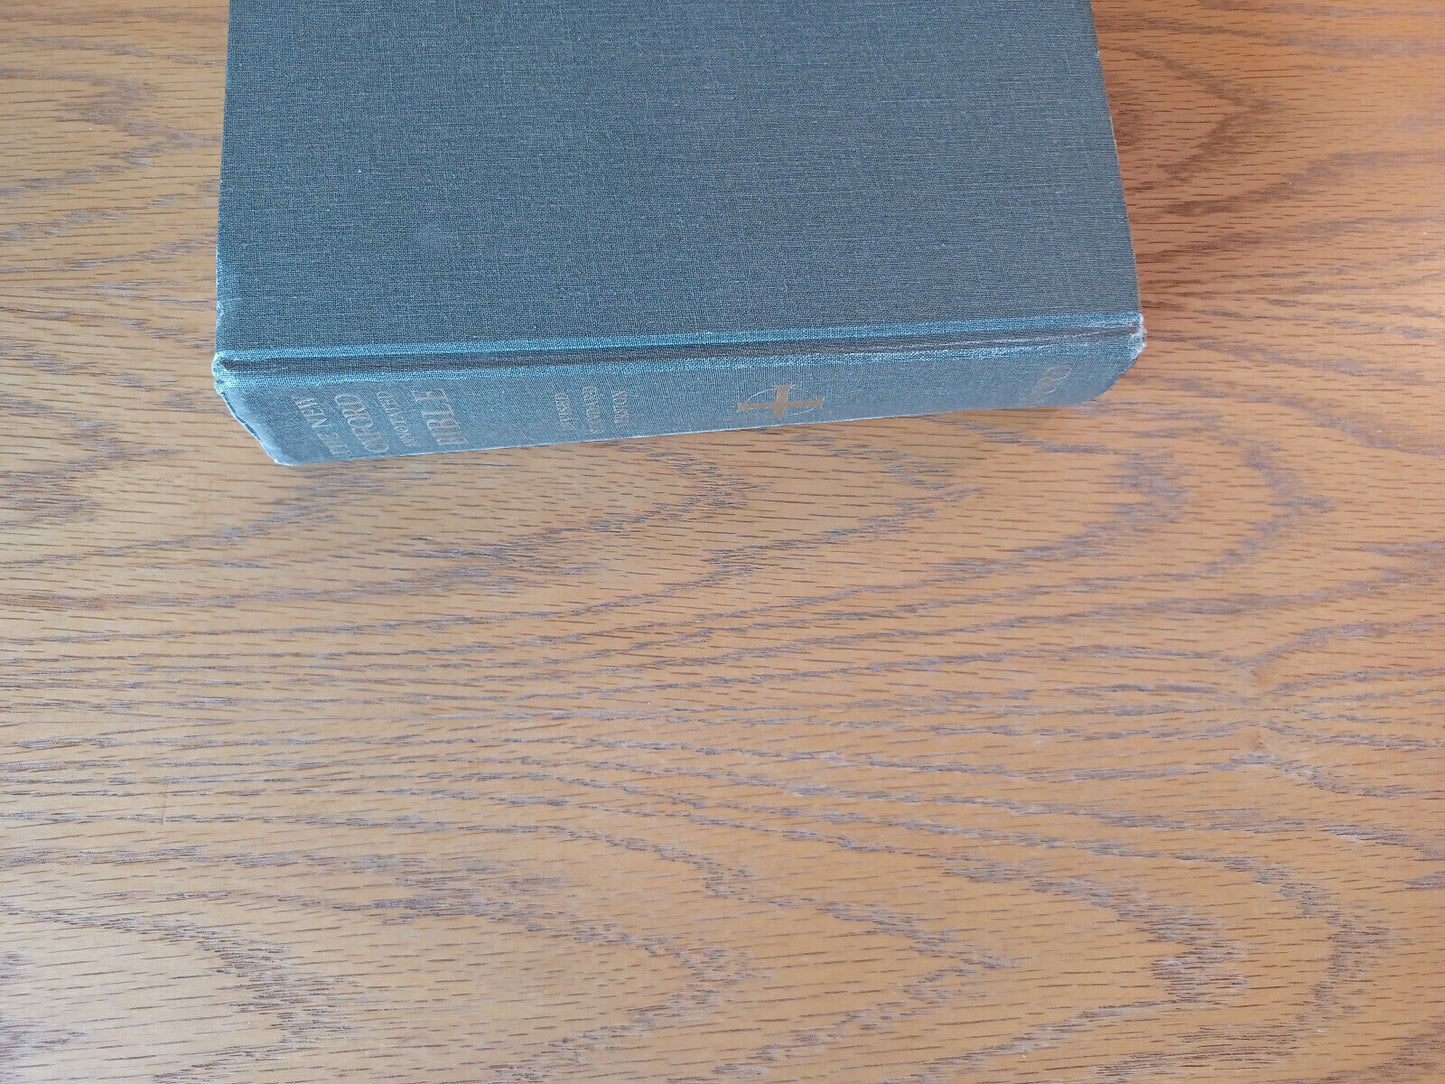 The New Oxford Annotated Bible RSV Holy Bible 1973 Hardcover Revised Standard V